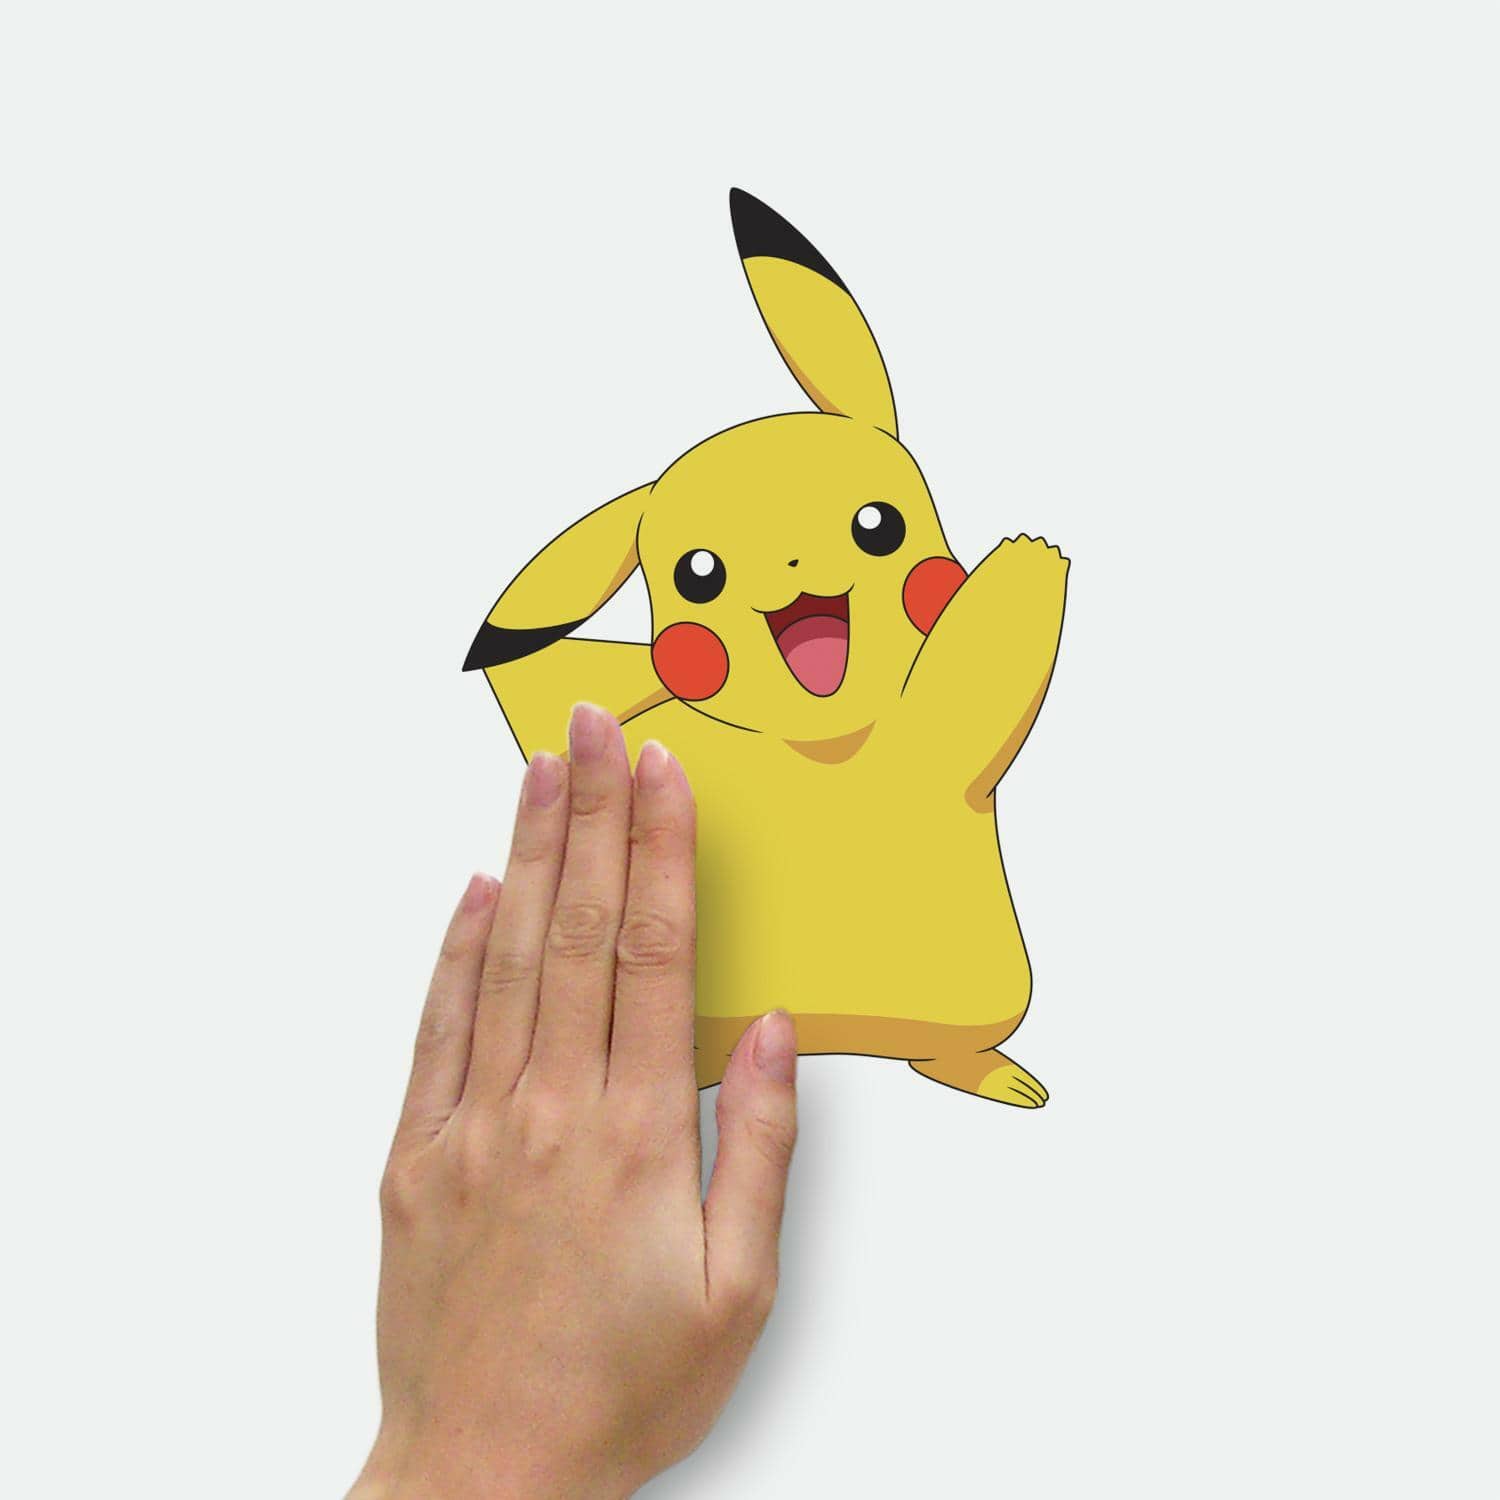 Pokemon Face Stickers for Sale